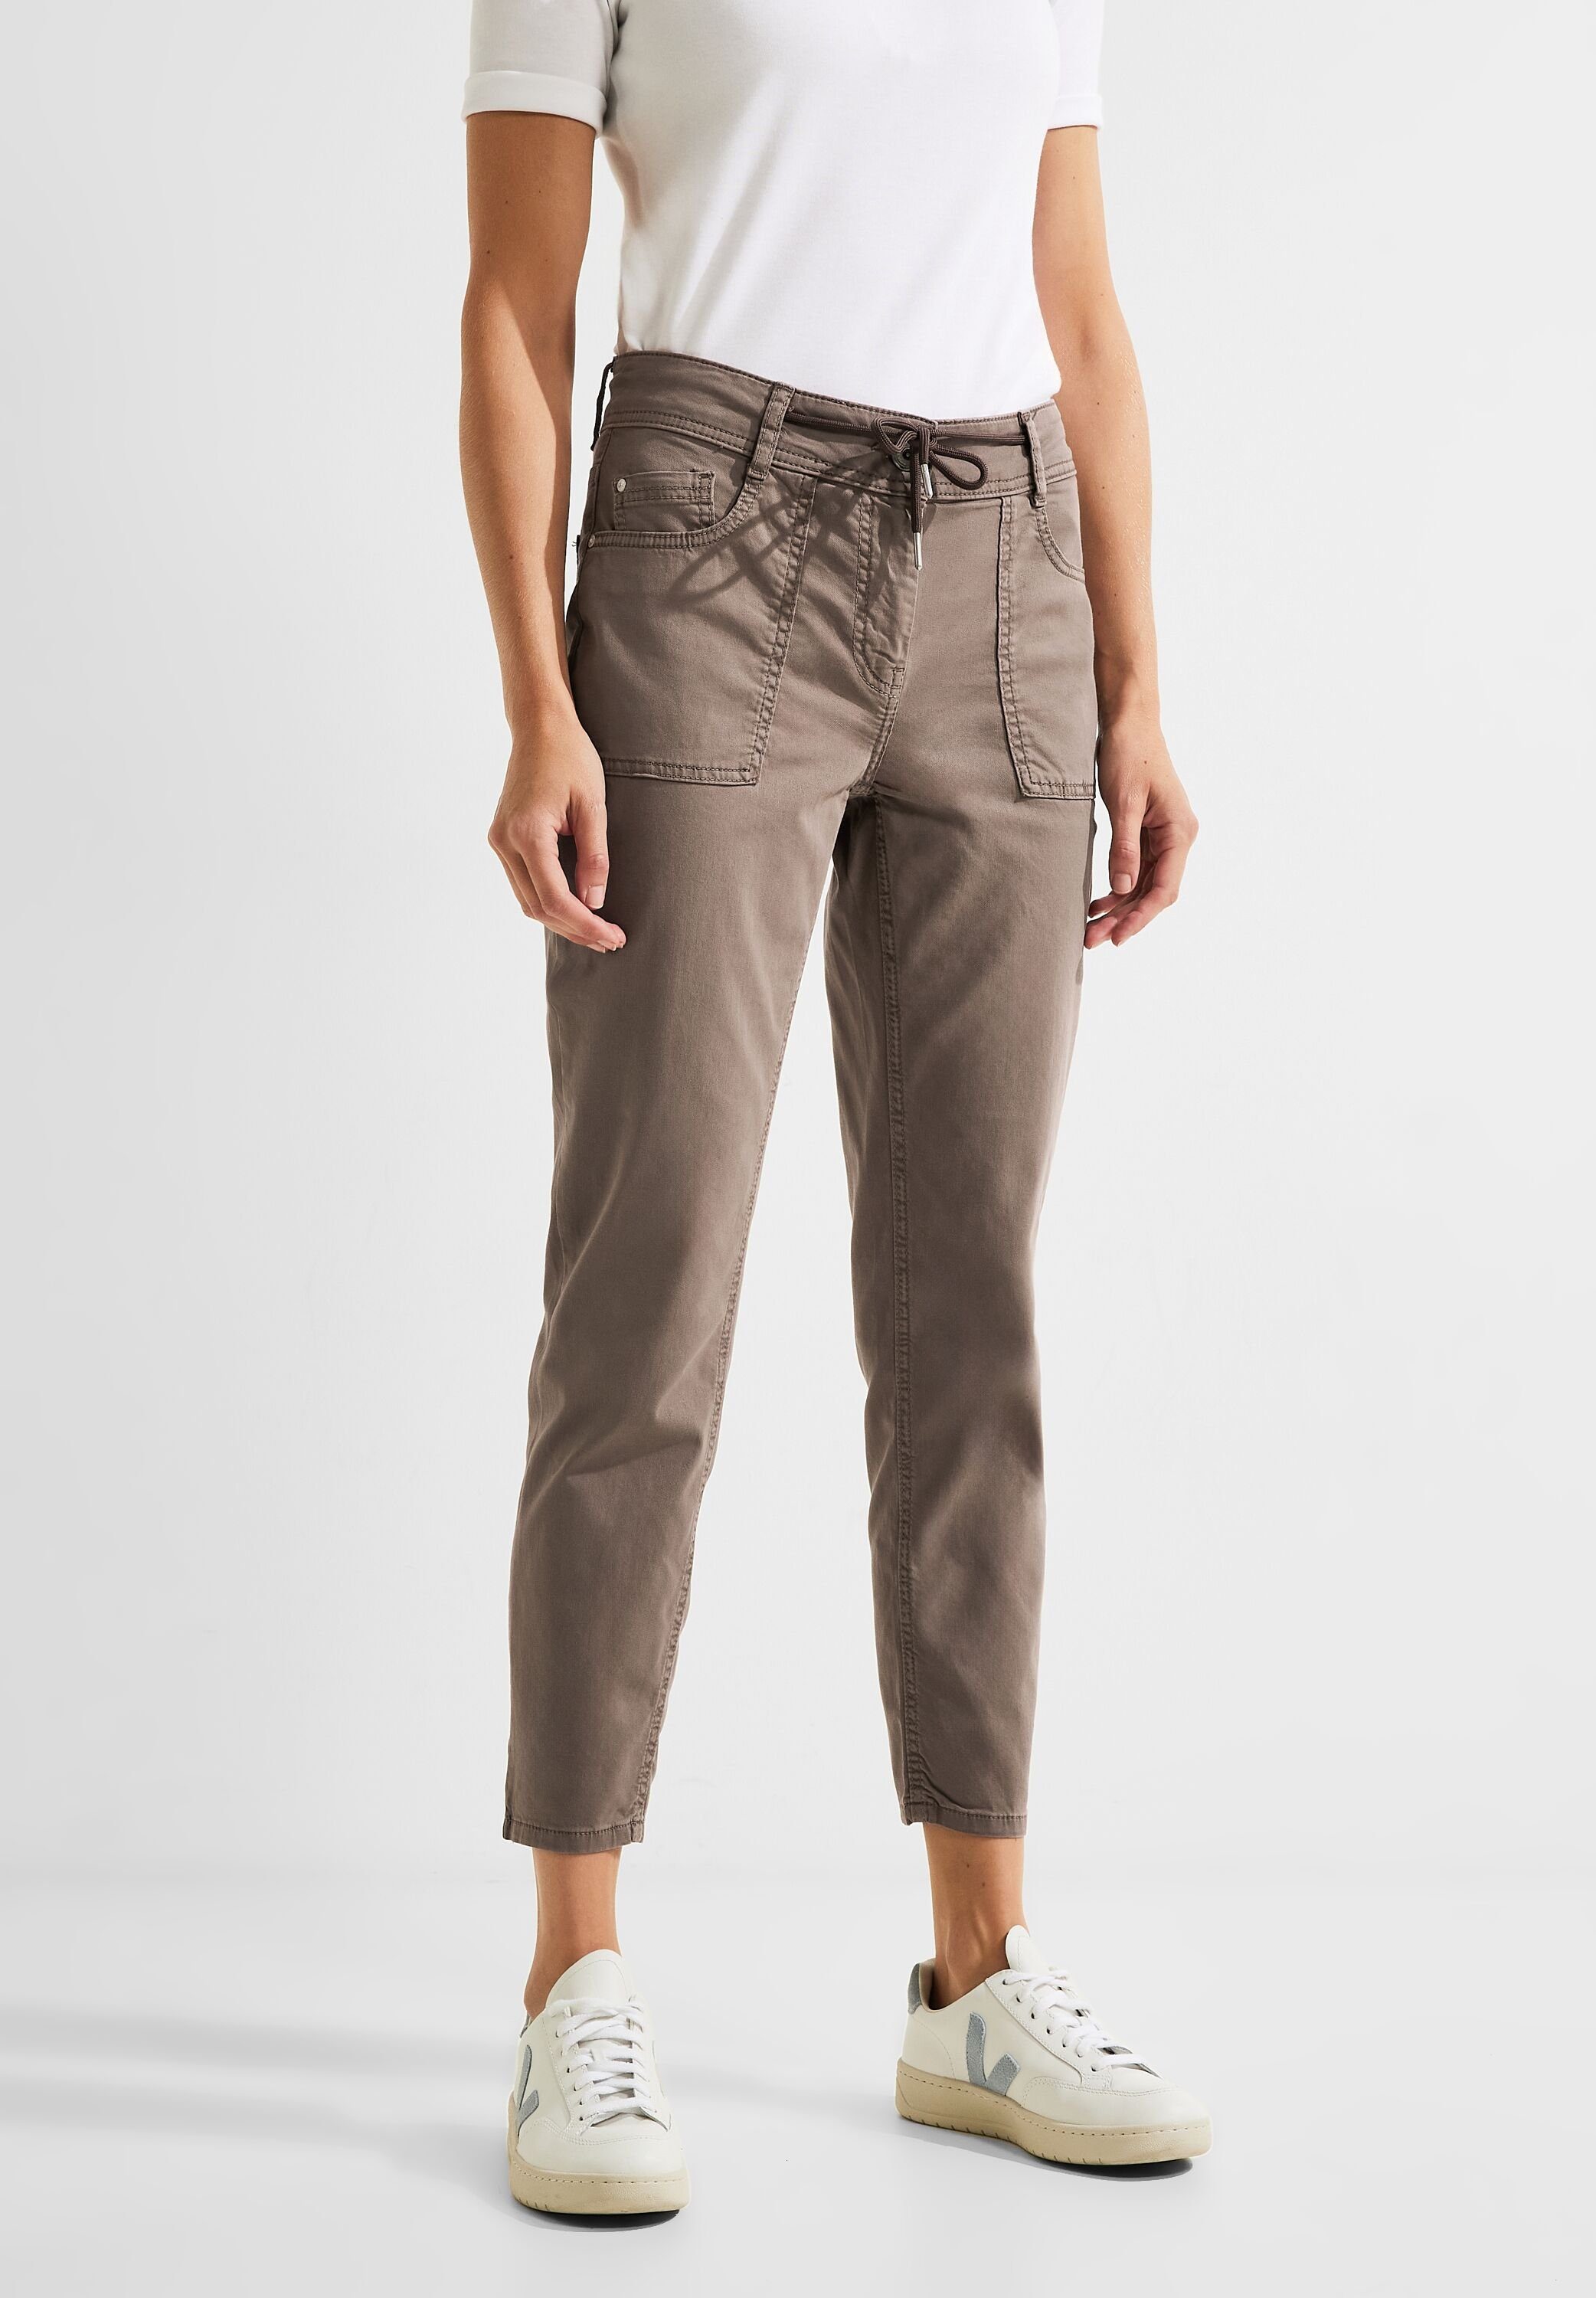 Stoffhose Cecil taupe 5-Pocket-Style sporty